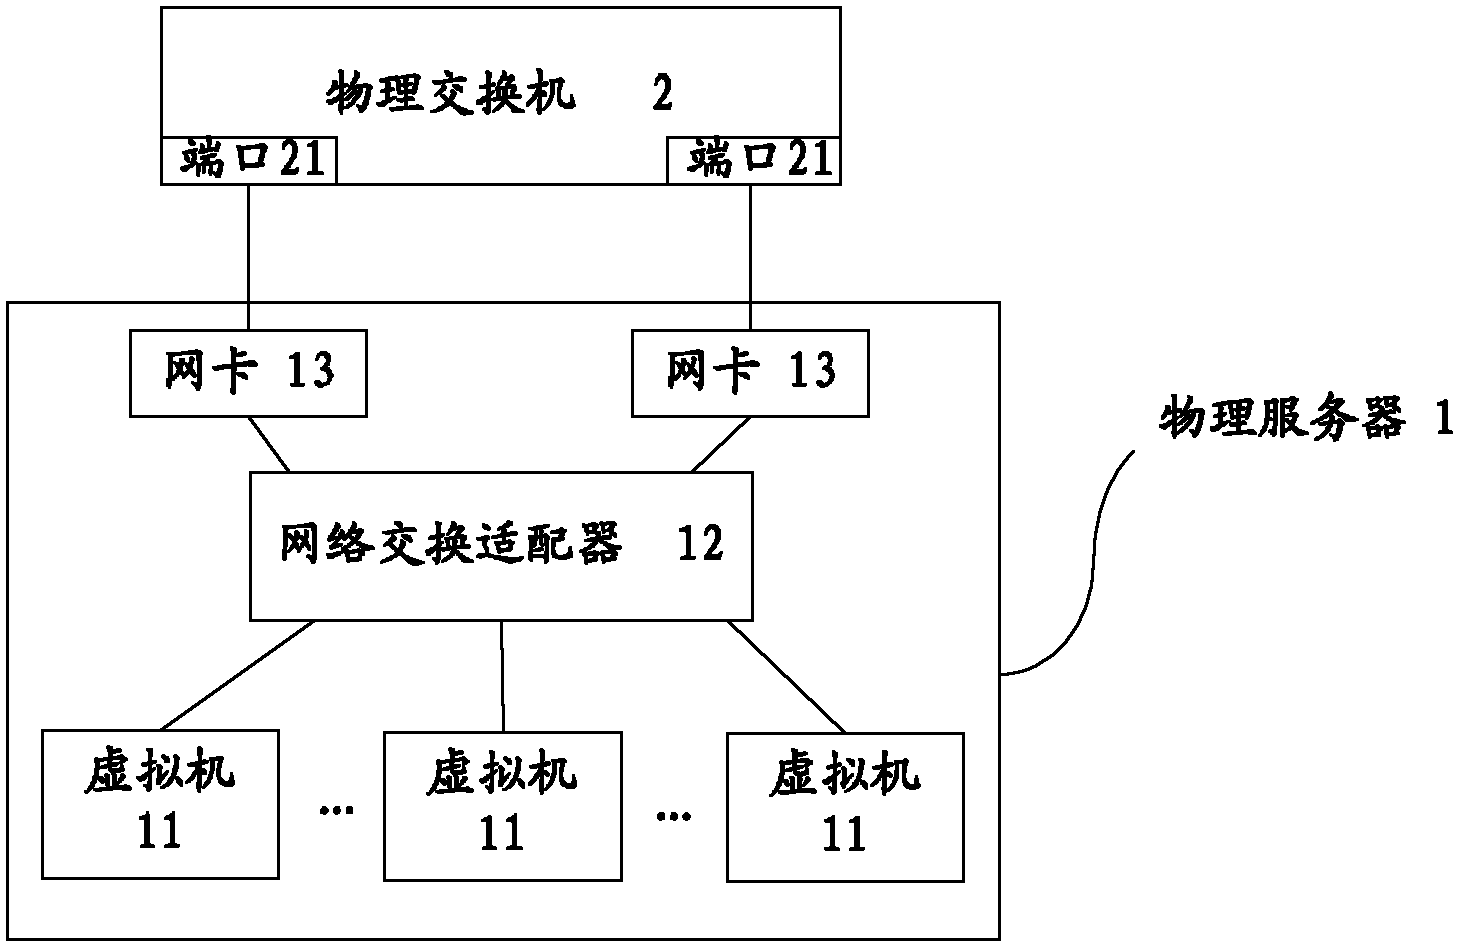 Network control system and network switching adapter